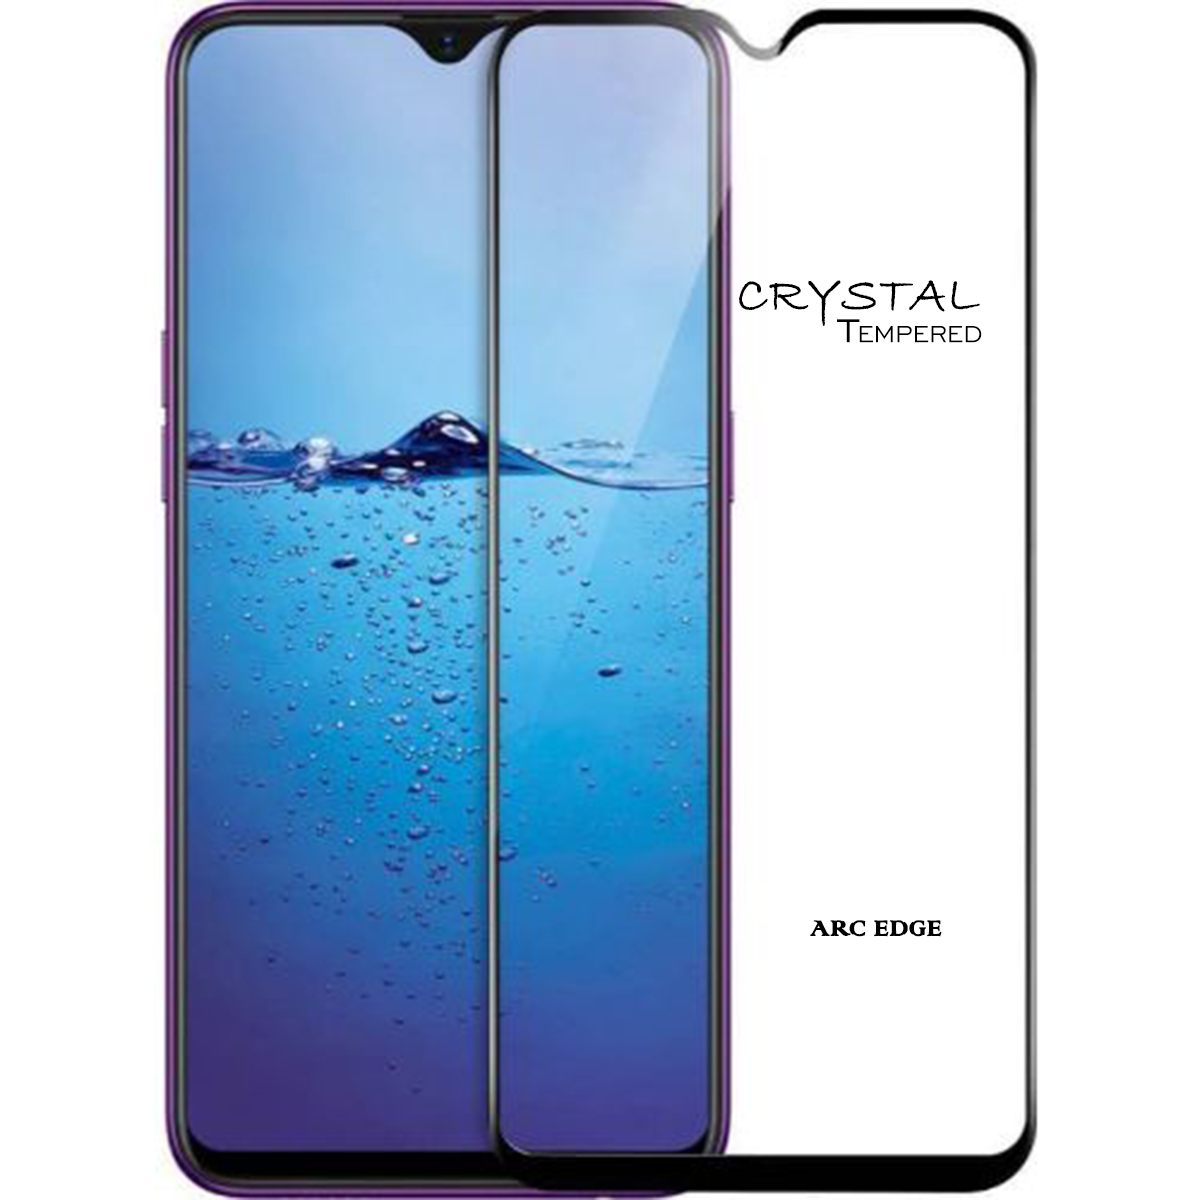 iFix Crystal 5D Tempered Glass for OPPO F9/F9 PRO/REALME 2 PRO/3 PRO/5 PRO/U1